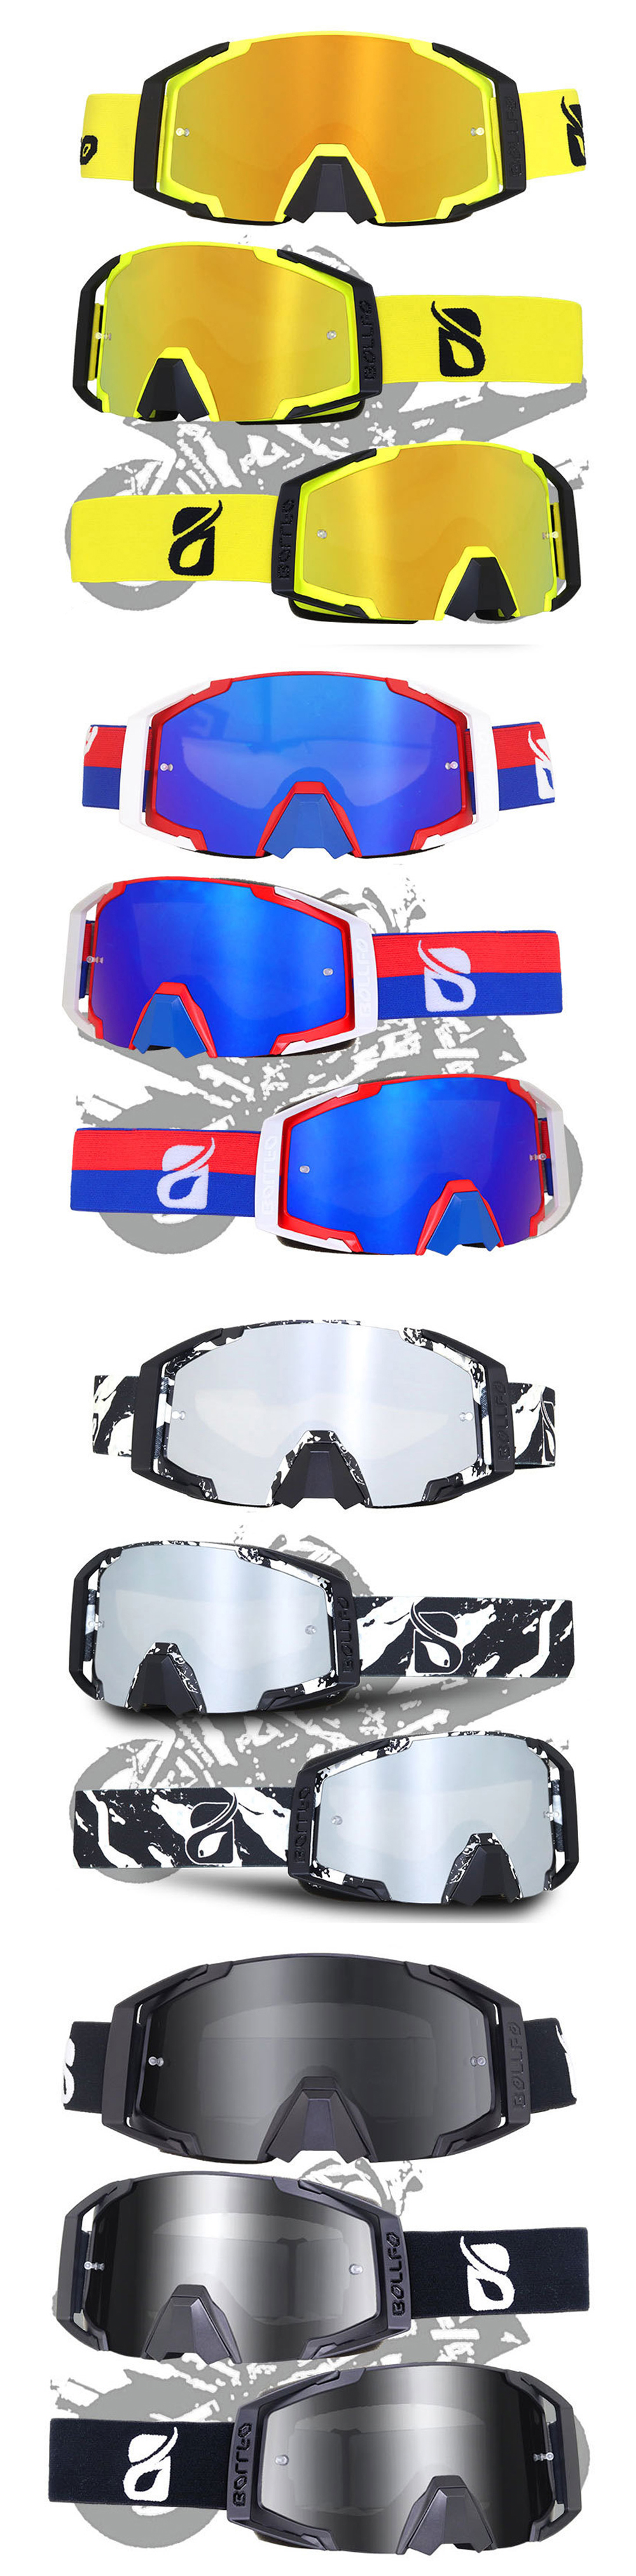 BOLLFO-Windproof-Skiing-Goggles-Dust-proof-Anti-UV-Riding-Motorcycle-Safety-Glasses-Outdoor-Sport-Pr-1763436-3